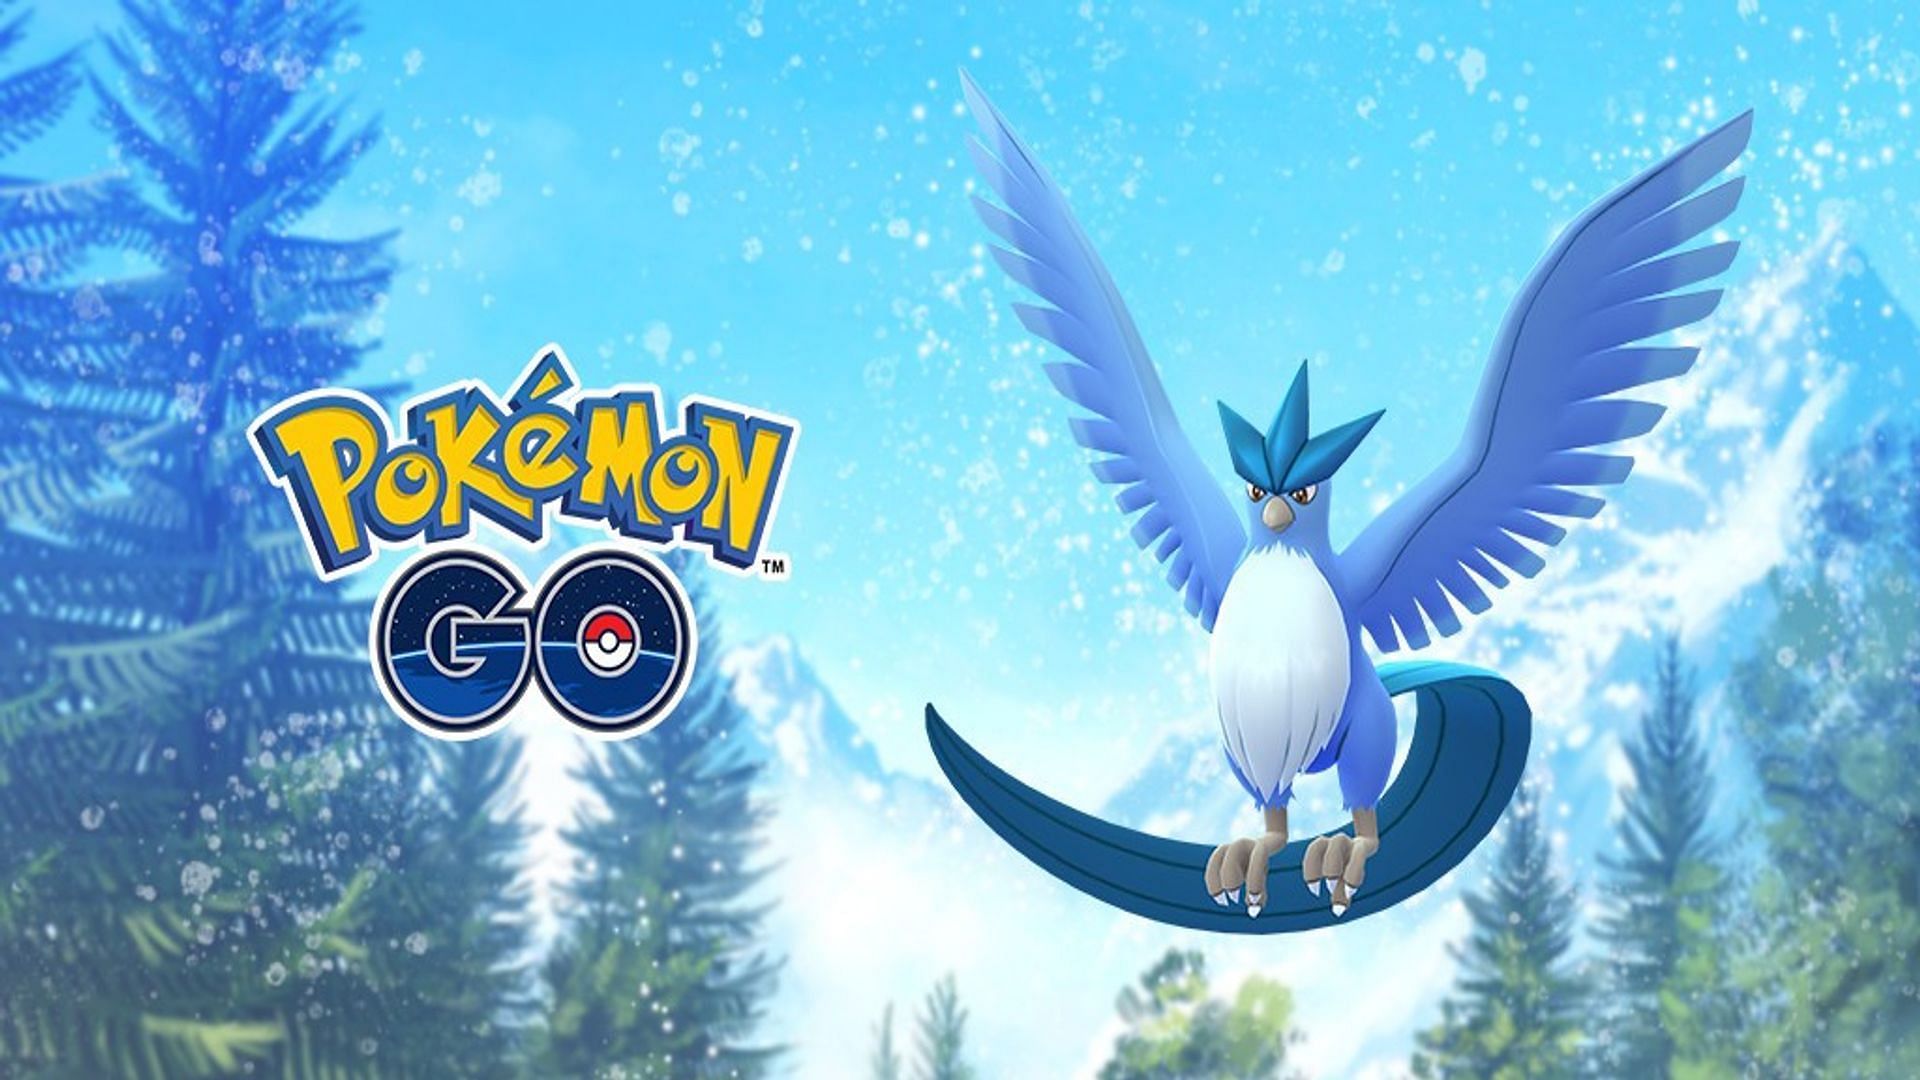 Official imagery for Articuno in Pokemon GO (Image via Niantic)